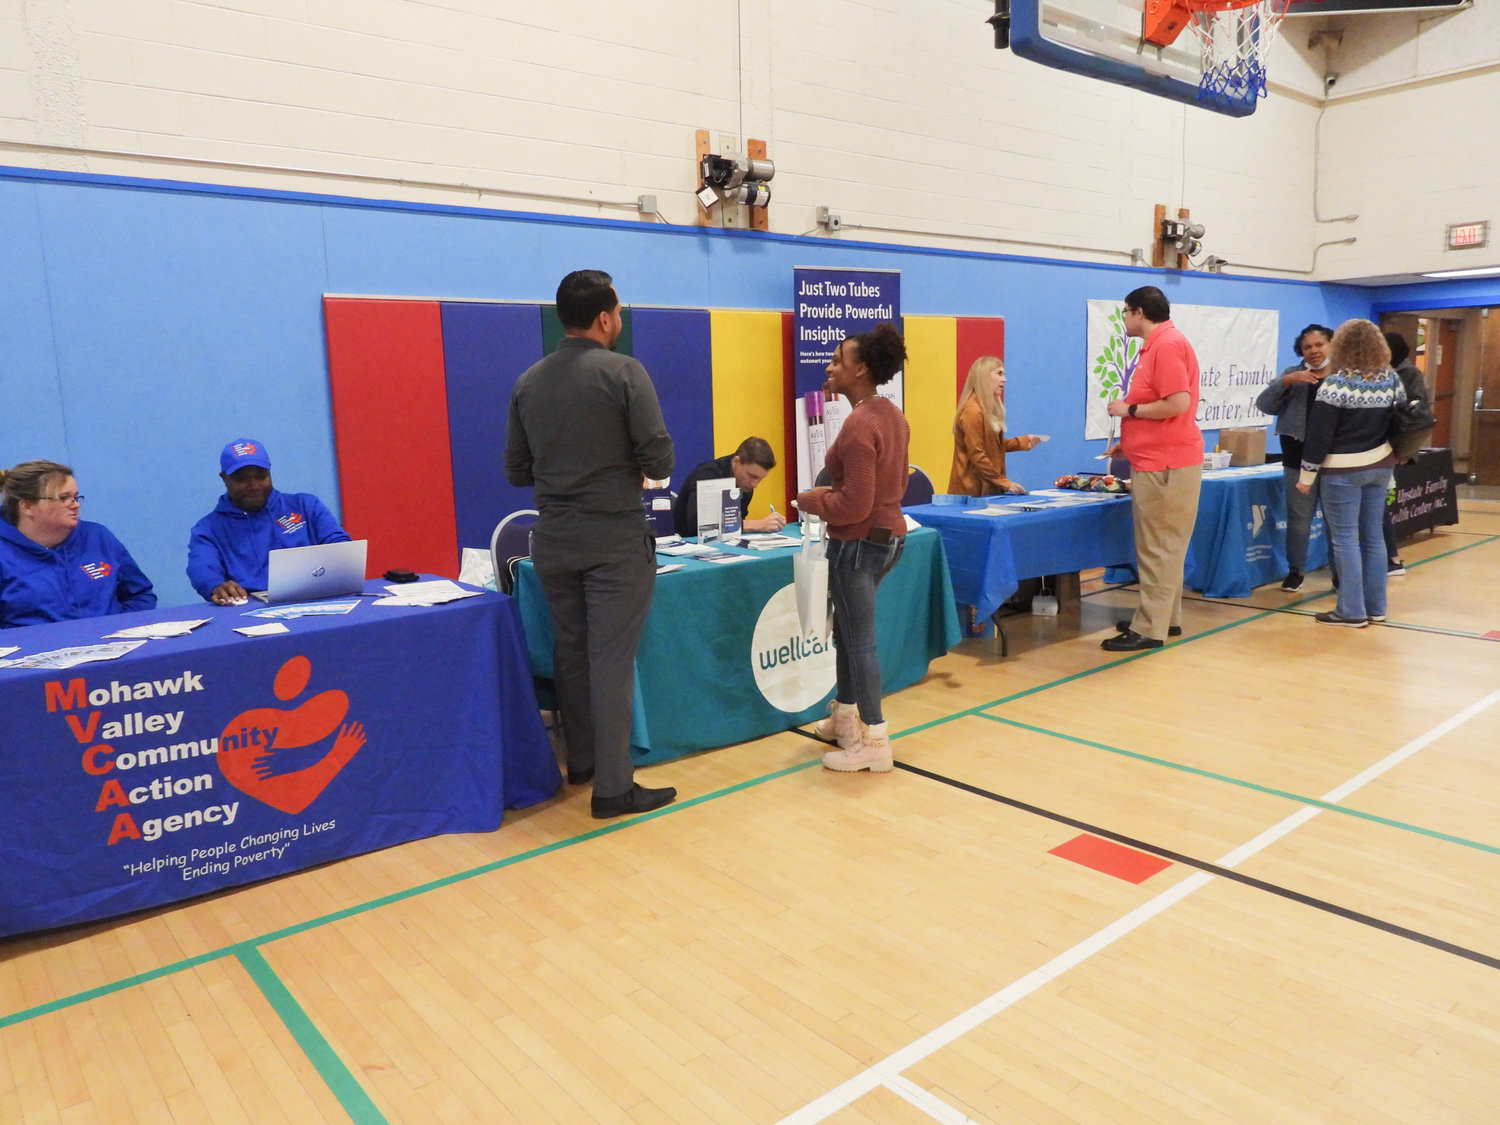 The inaugural Community Partner Vendor Fair on Saturday, Sept. 24 saw service providers come together to learn from each other to better support the community